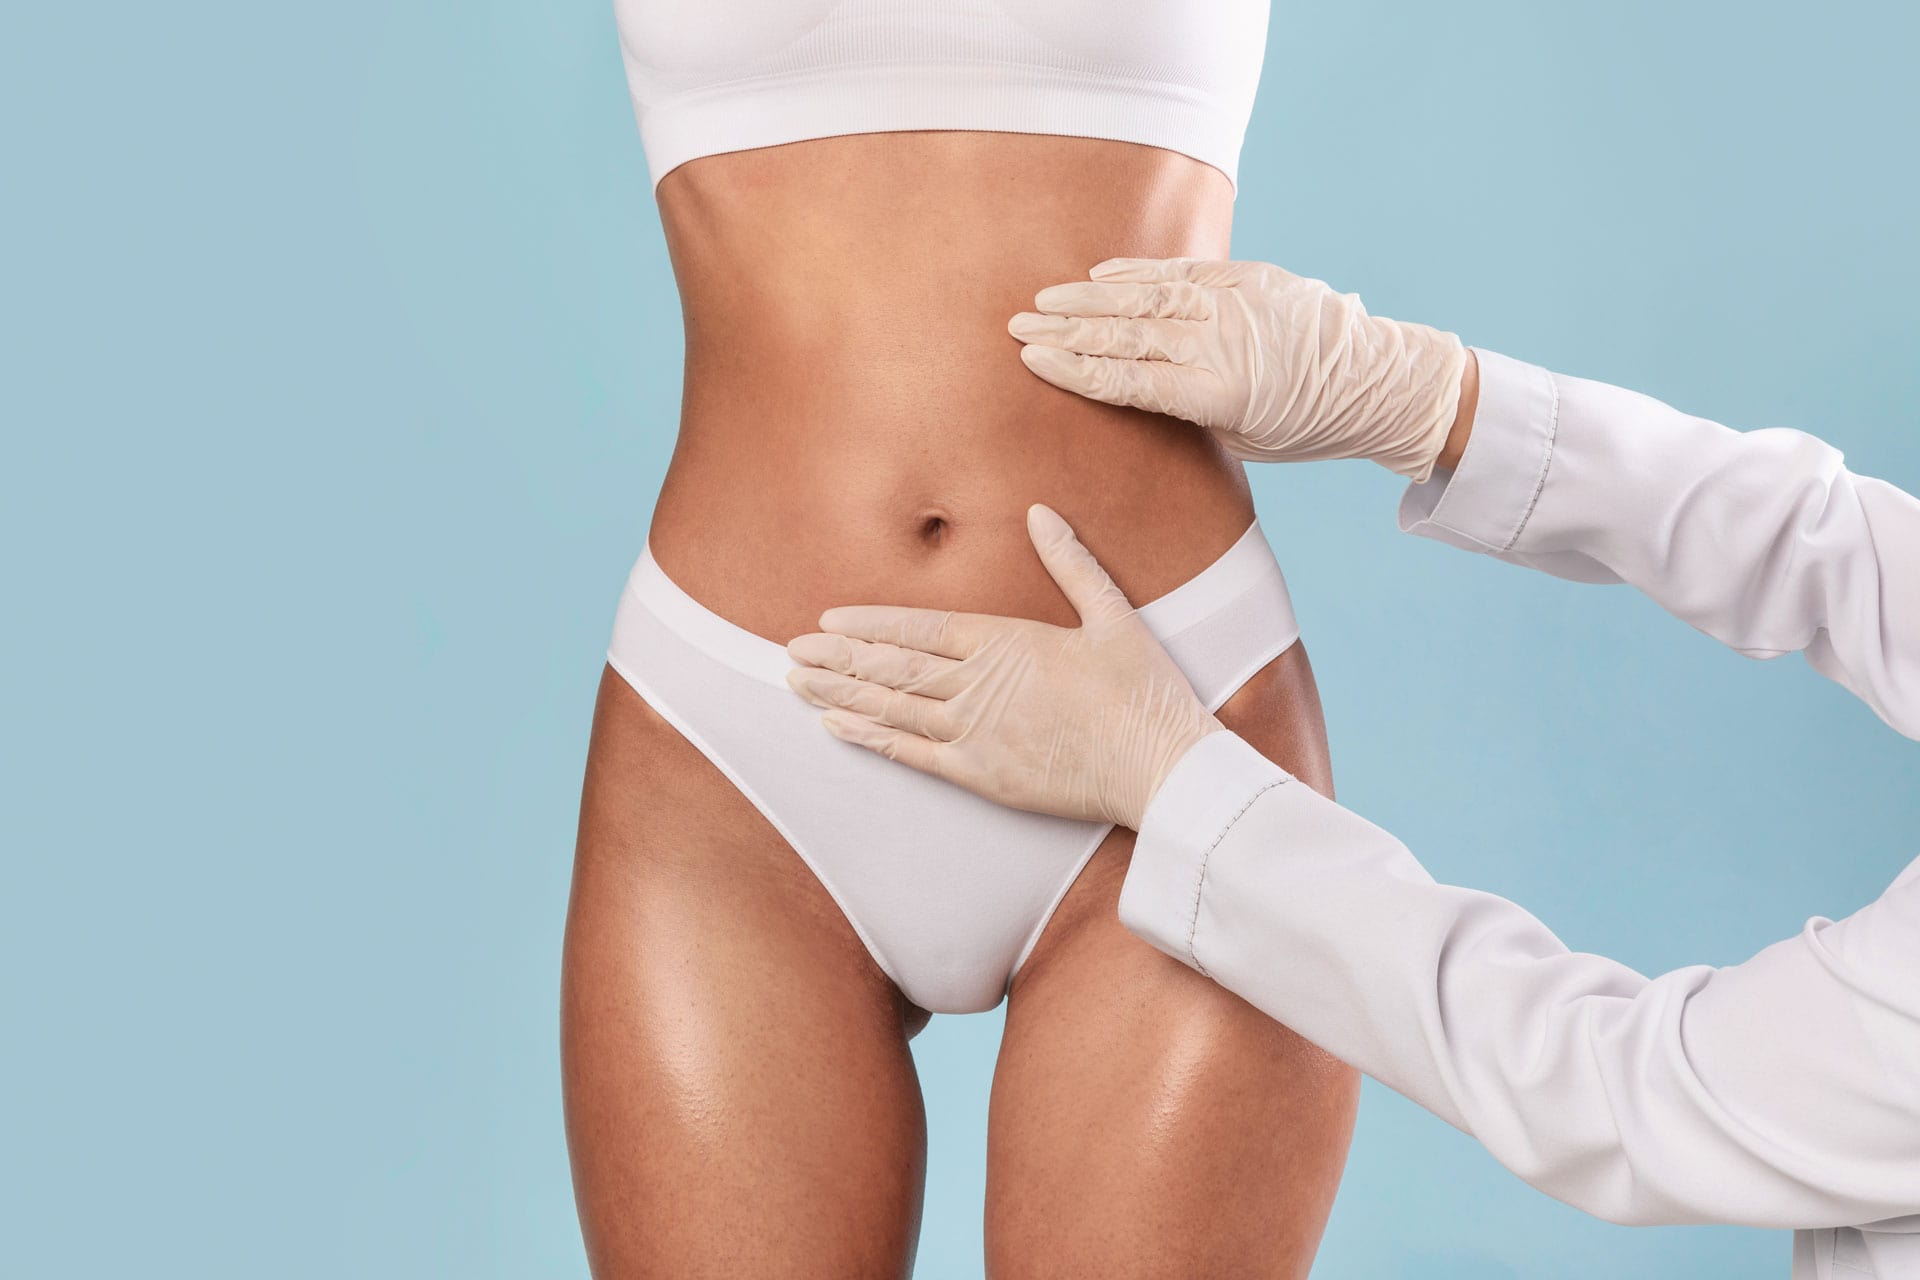 woman-getting-consultation-at-plastic-surgery-clin-min